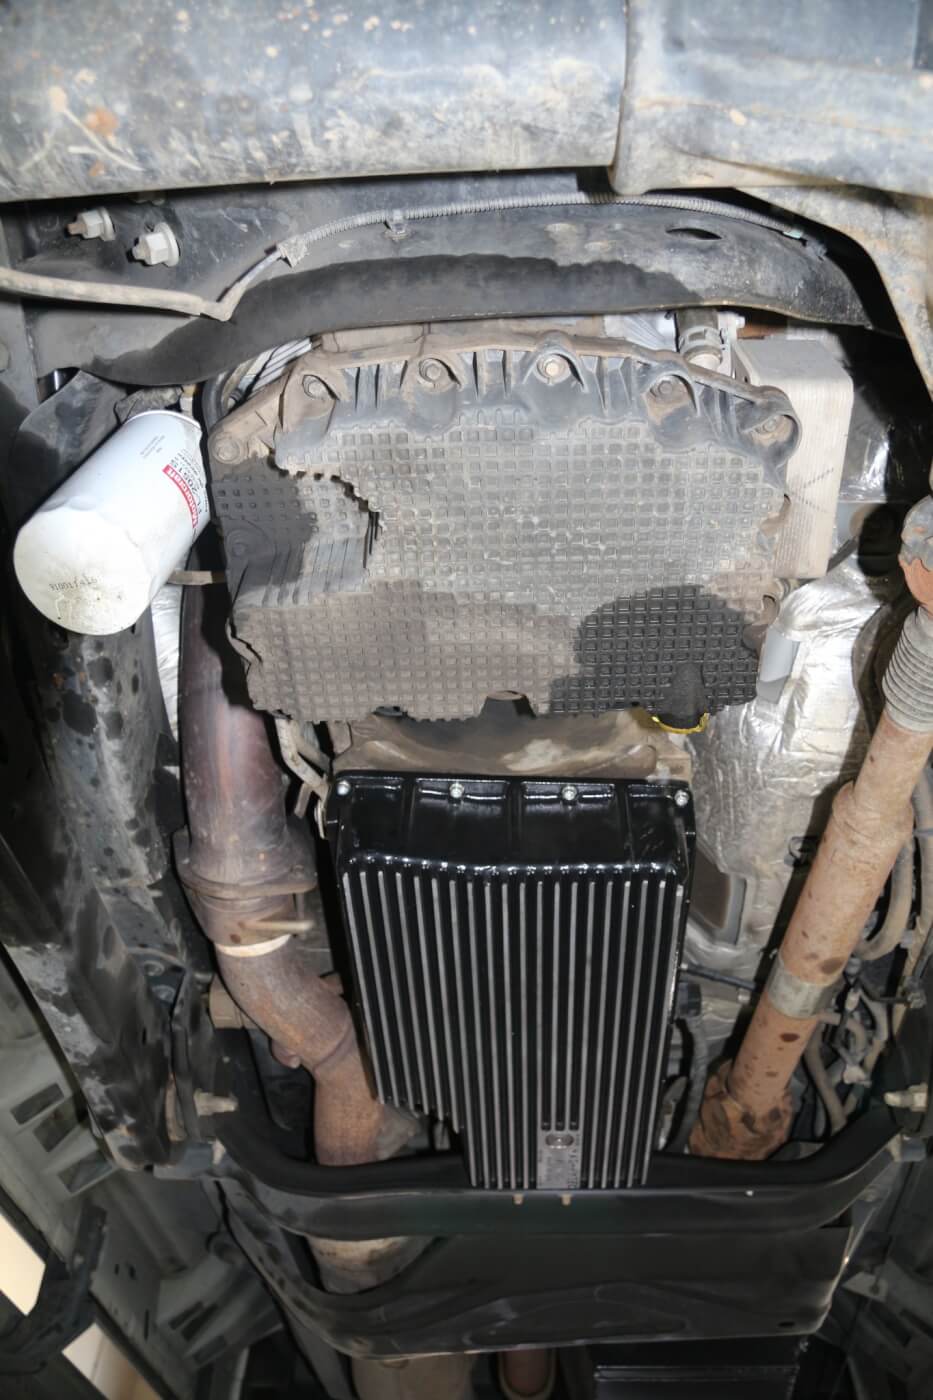 2. In this view, you can see the oil pan drain leak area (right), and a spot from oil dripping off the filter (left). This filter drip is likely from past oil changes, as filter leaking on the 6.7L is usually only reported when the filters are not properly installed.